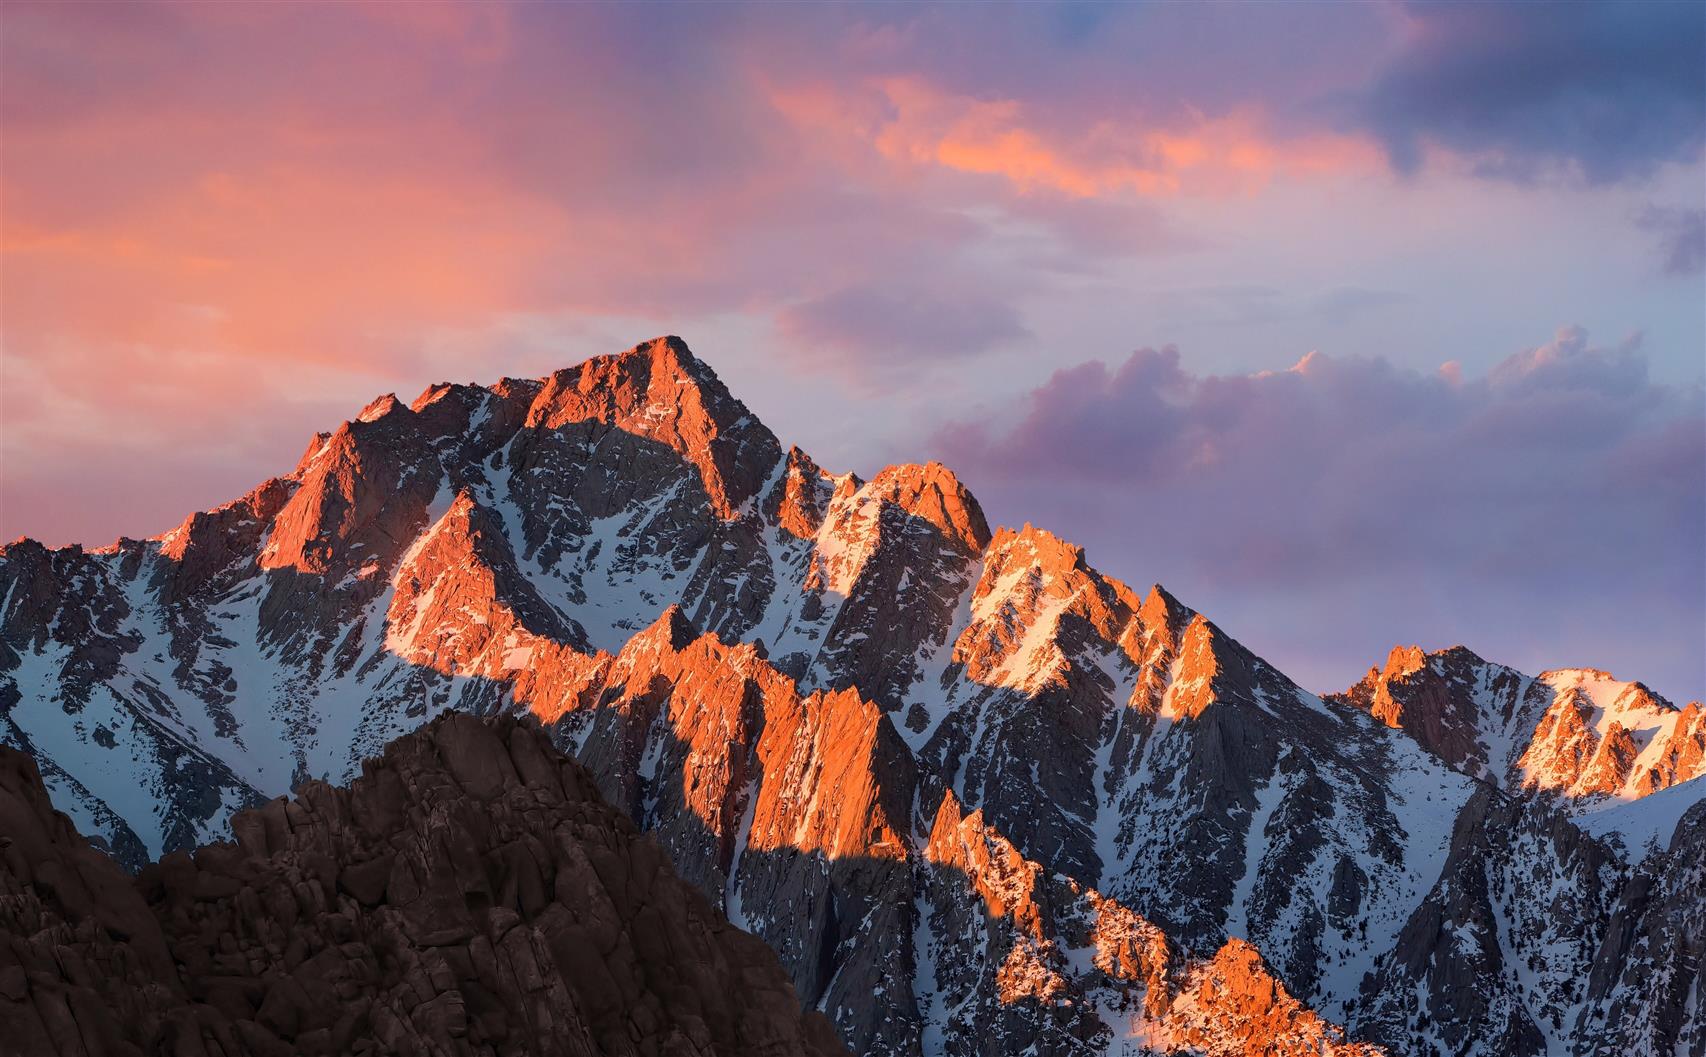 macOS Sierra, snow covered mountain, Computers, apple, scenics - nature, HD wallpaper